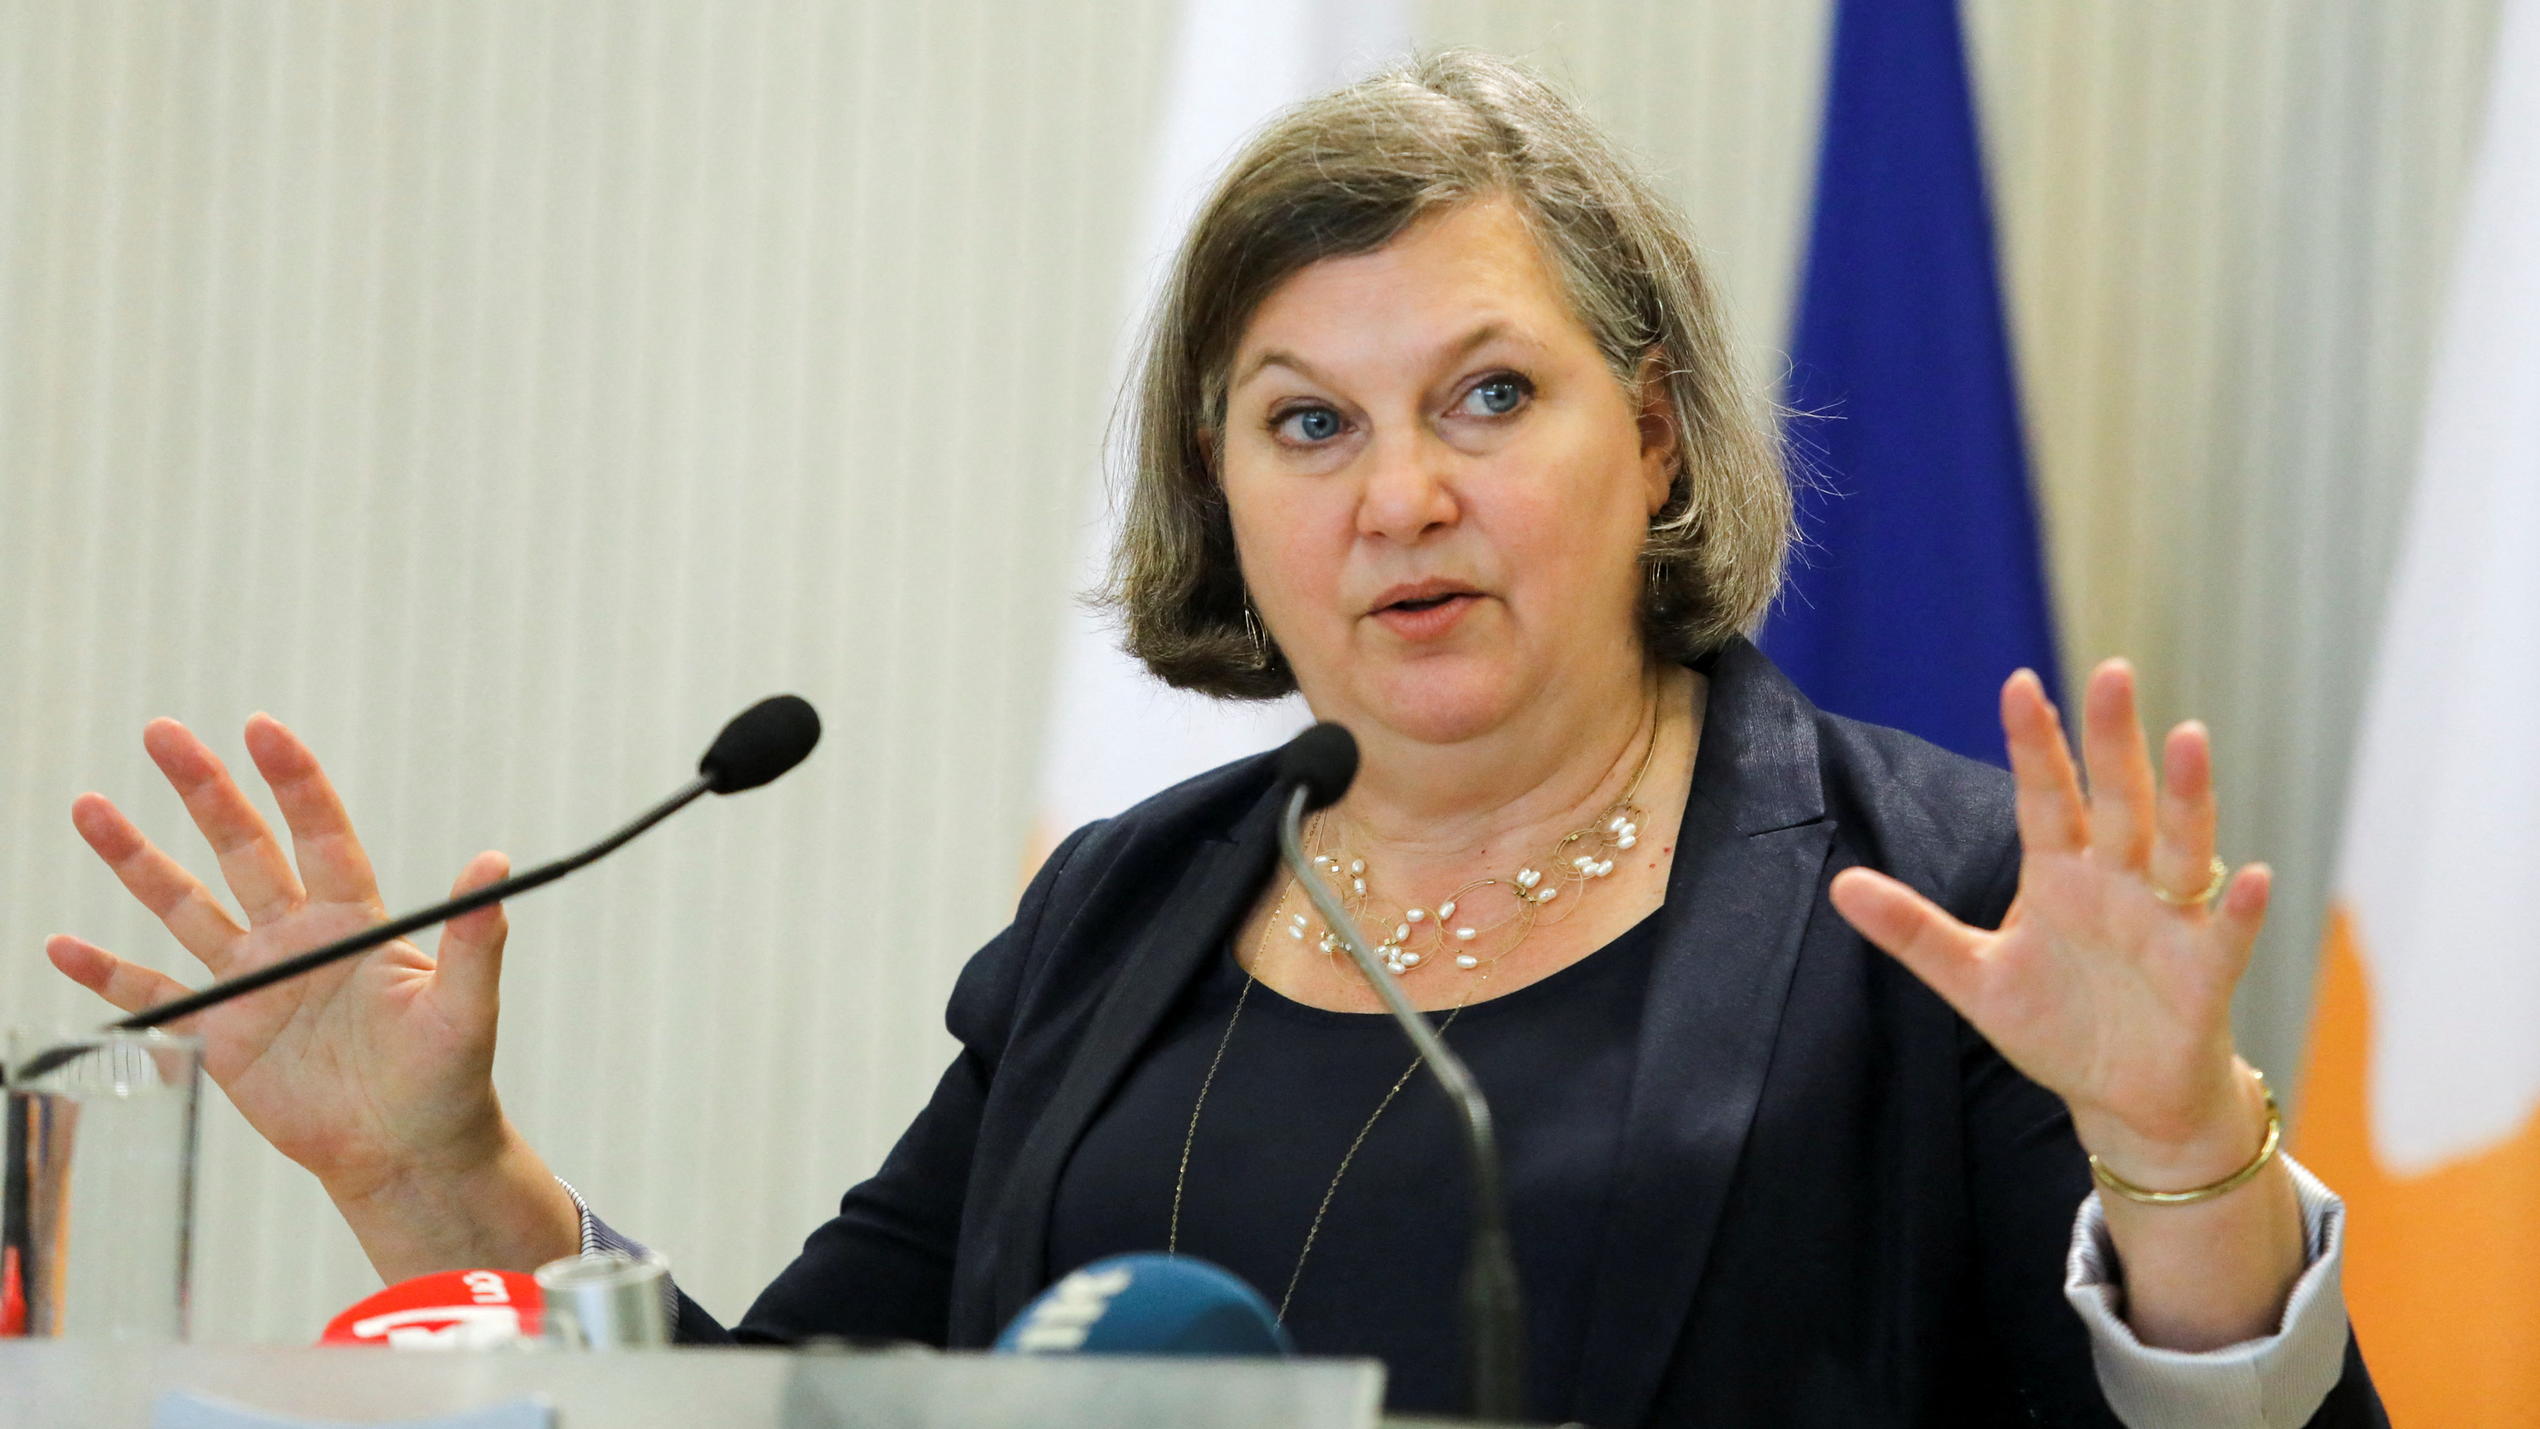 U.S. State Department Under Secretary for Public Affairs Victoria Nuland attends a news conference at the Presidential Palace in Nicosia, Cyprus, April 7, 2022. REUTERS/Yiannis Kourtoglou